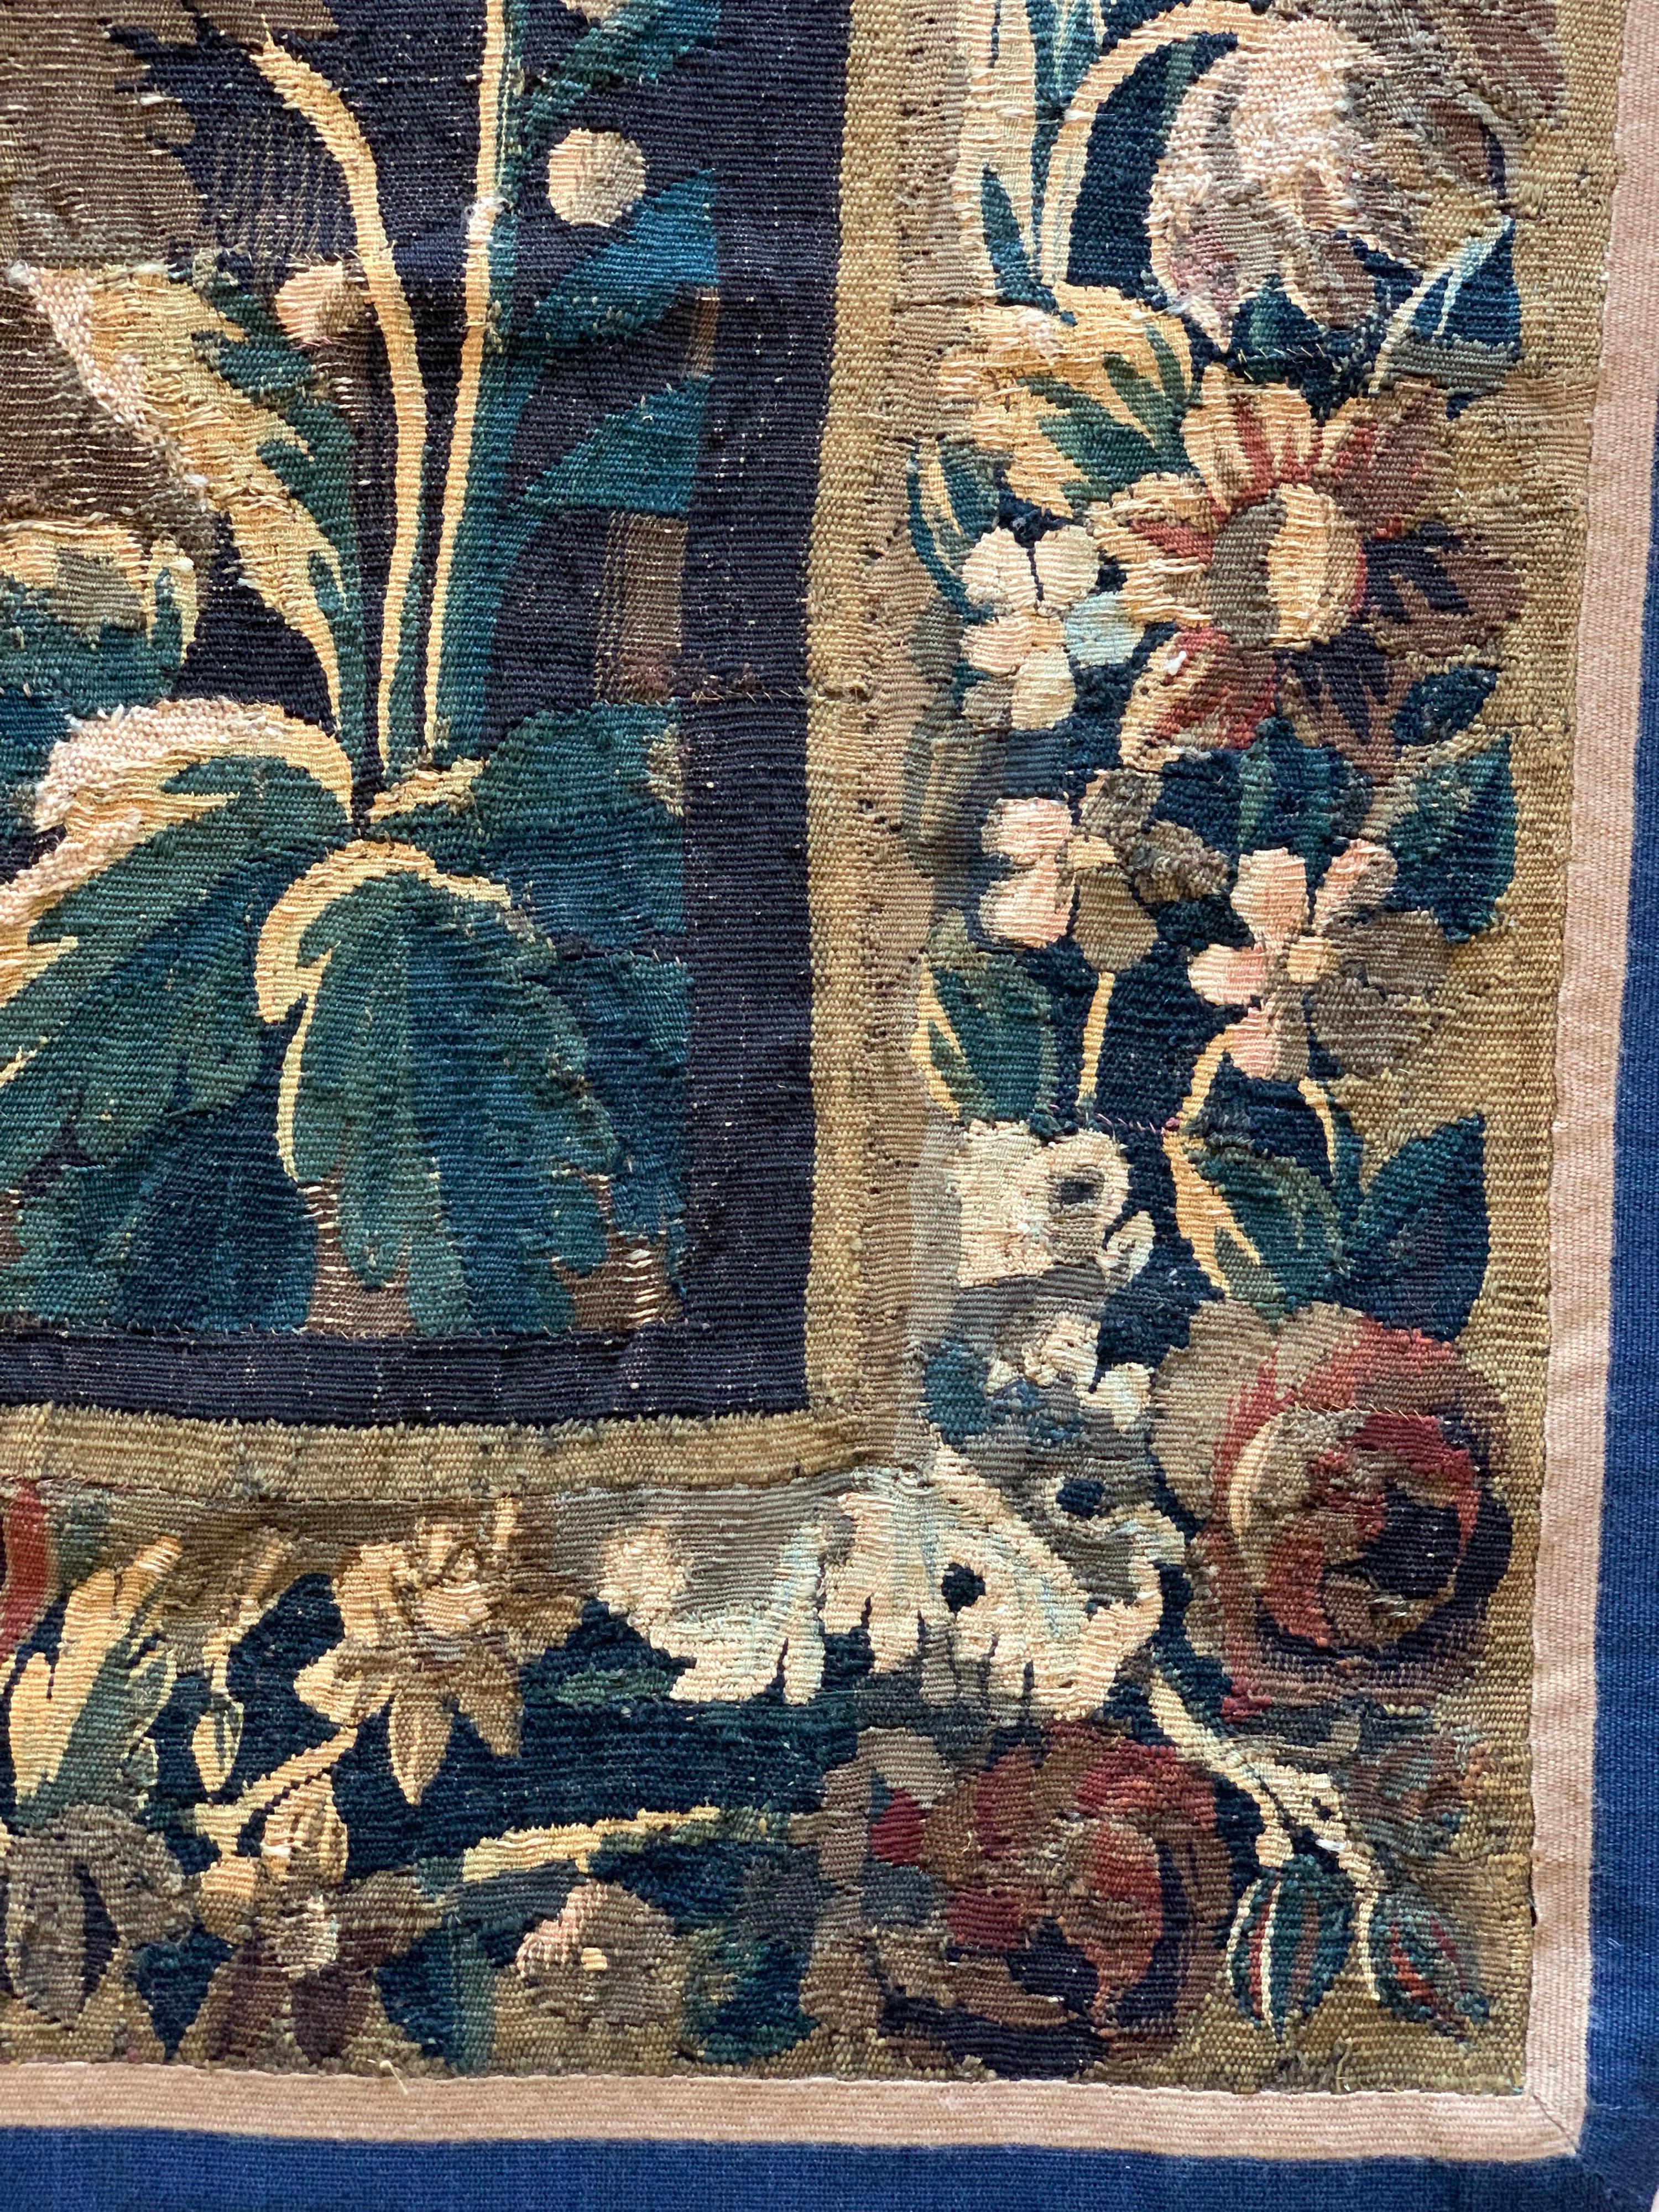 Antique 17th Century Flemish Verdure Landscape Tapestry In Good Condition For Sale In New York, NY